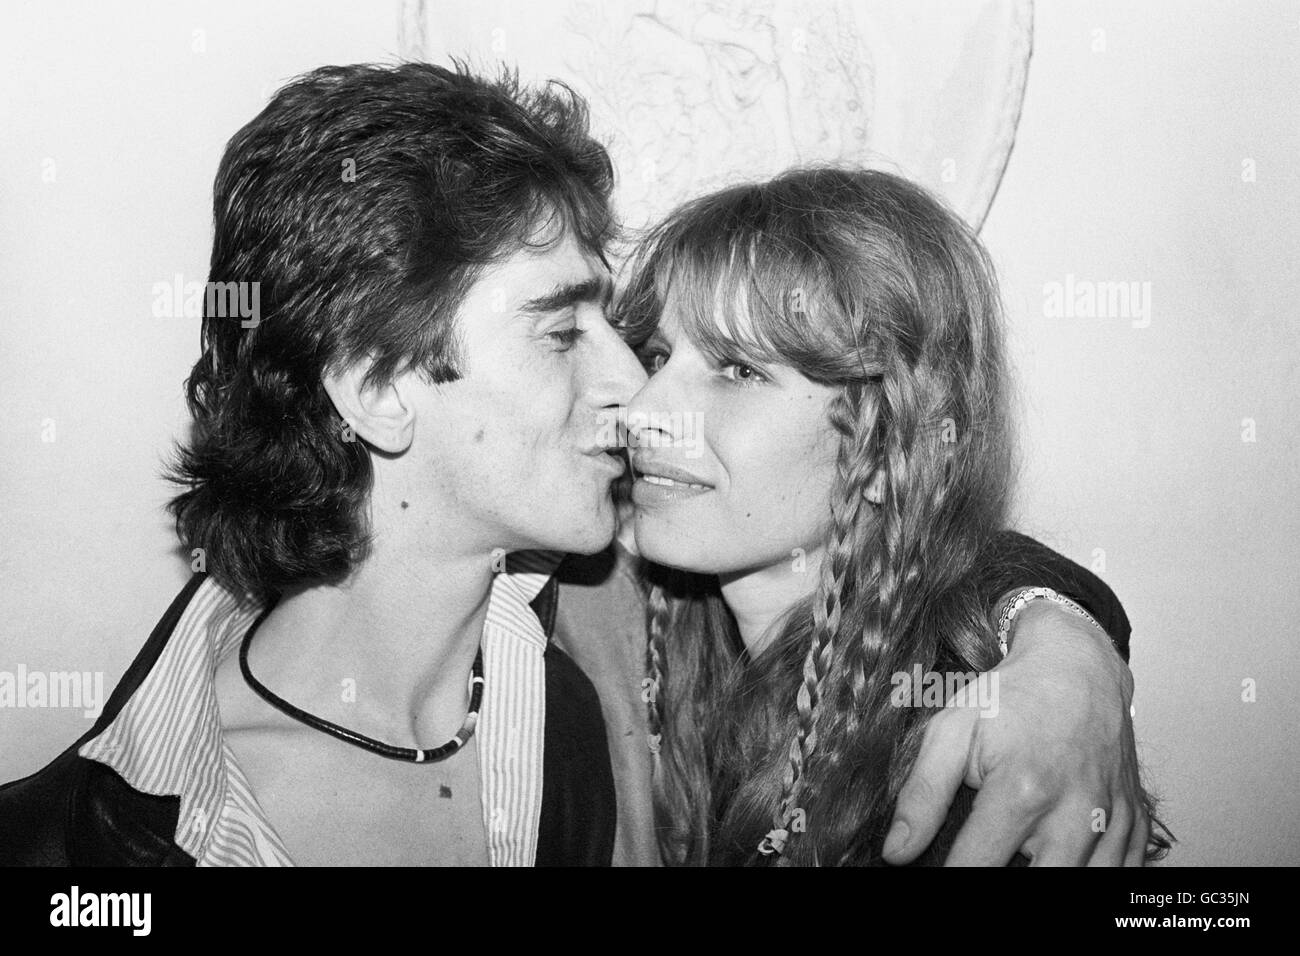 Gary Holton, 30, lead singer of punk band Heavey Metal Kids and an actor on ITV's award winning series 'Auf Wiedersehen Pet', with his girlfriend Susan Harrison. They have two children. Stock Photo